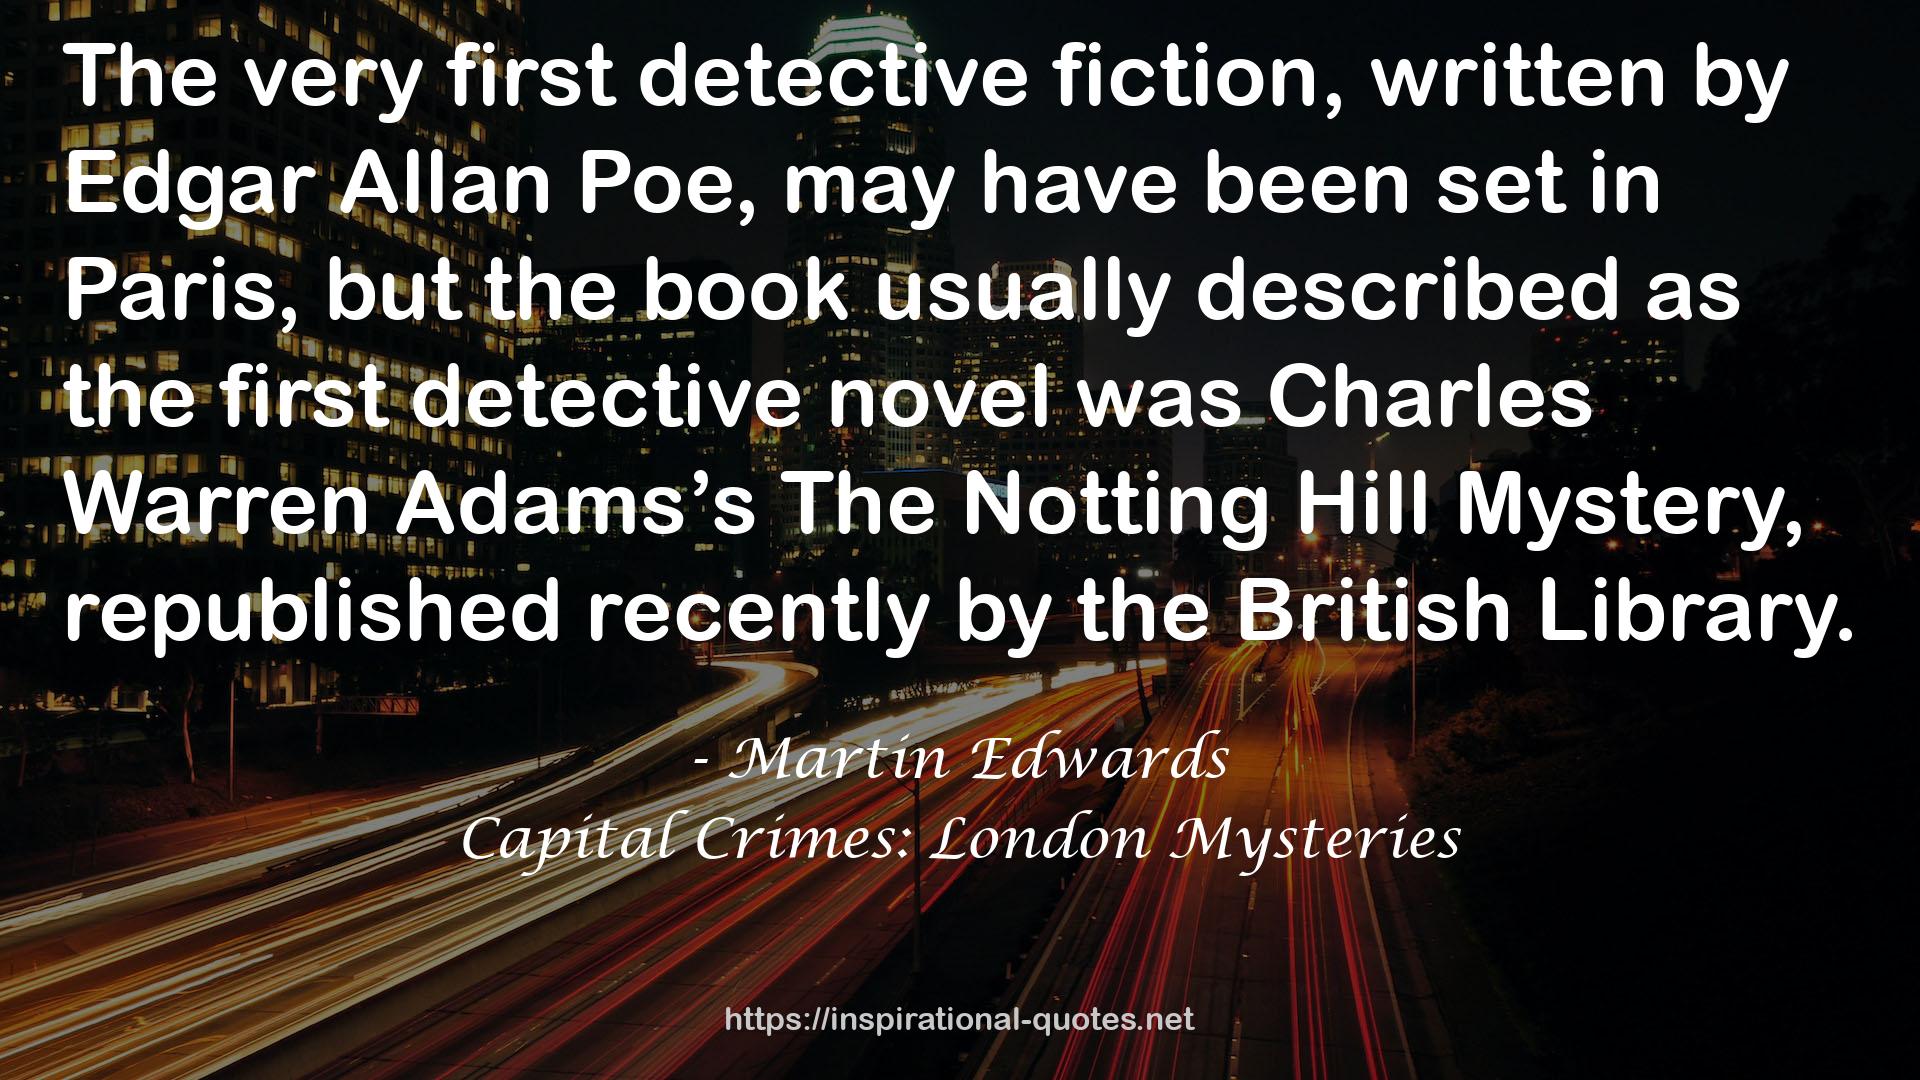 Capital Crimes: London Mysteries QUOTES